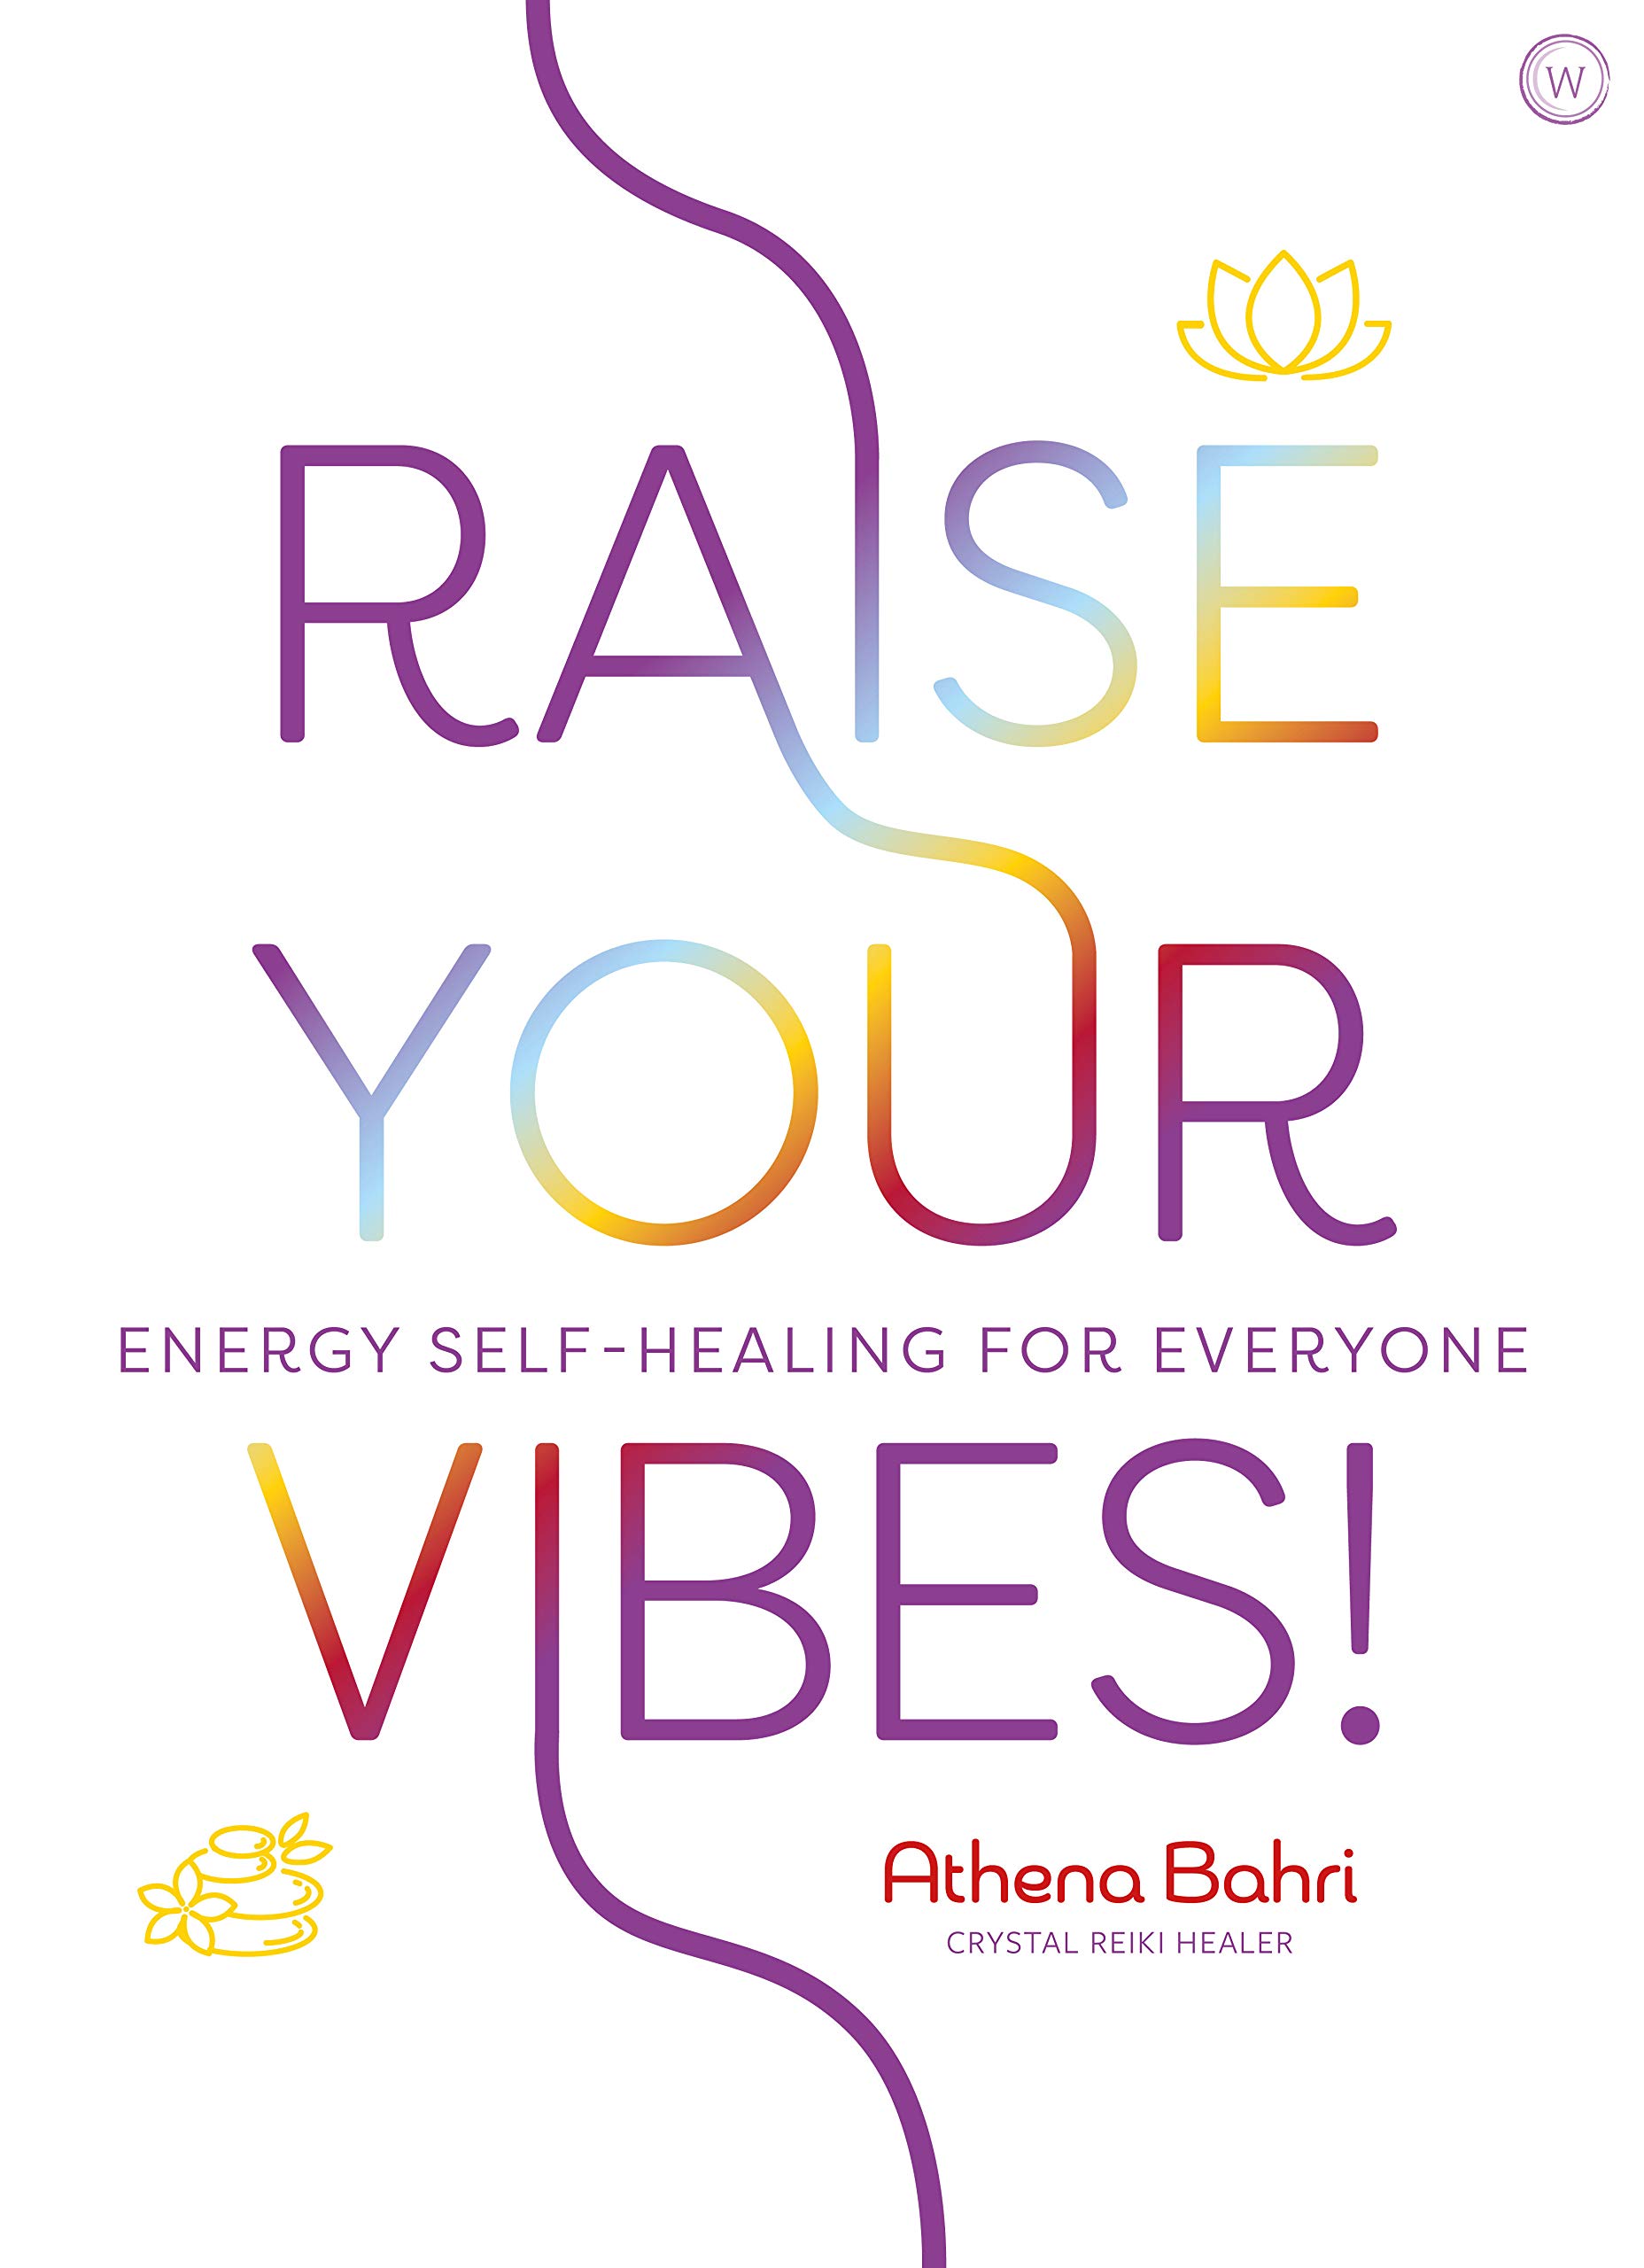 Raise Your Vibes!